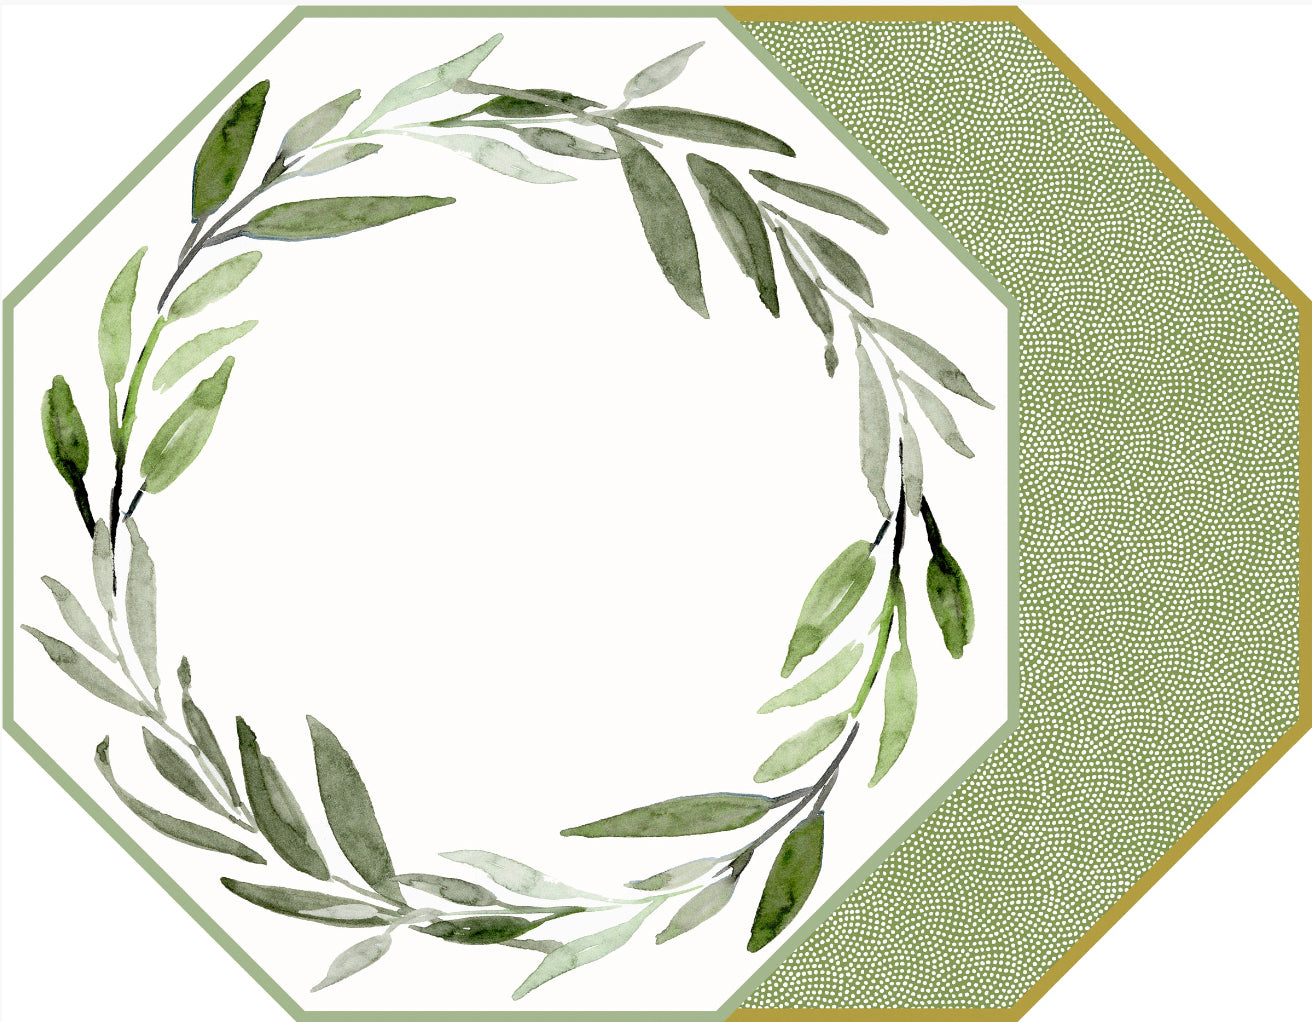 OCTAGONAL TWO SIDED LEAVES WREATH PLACEMAT WITH DOT FAN ~ SAXON GREEN